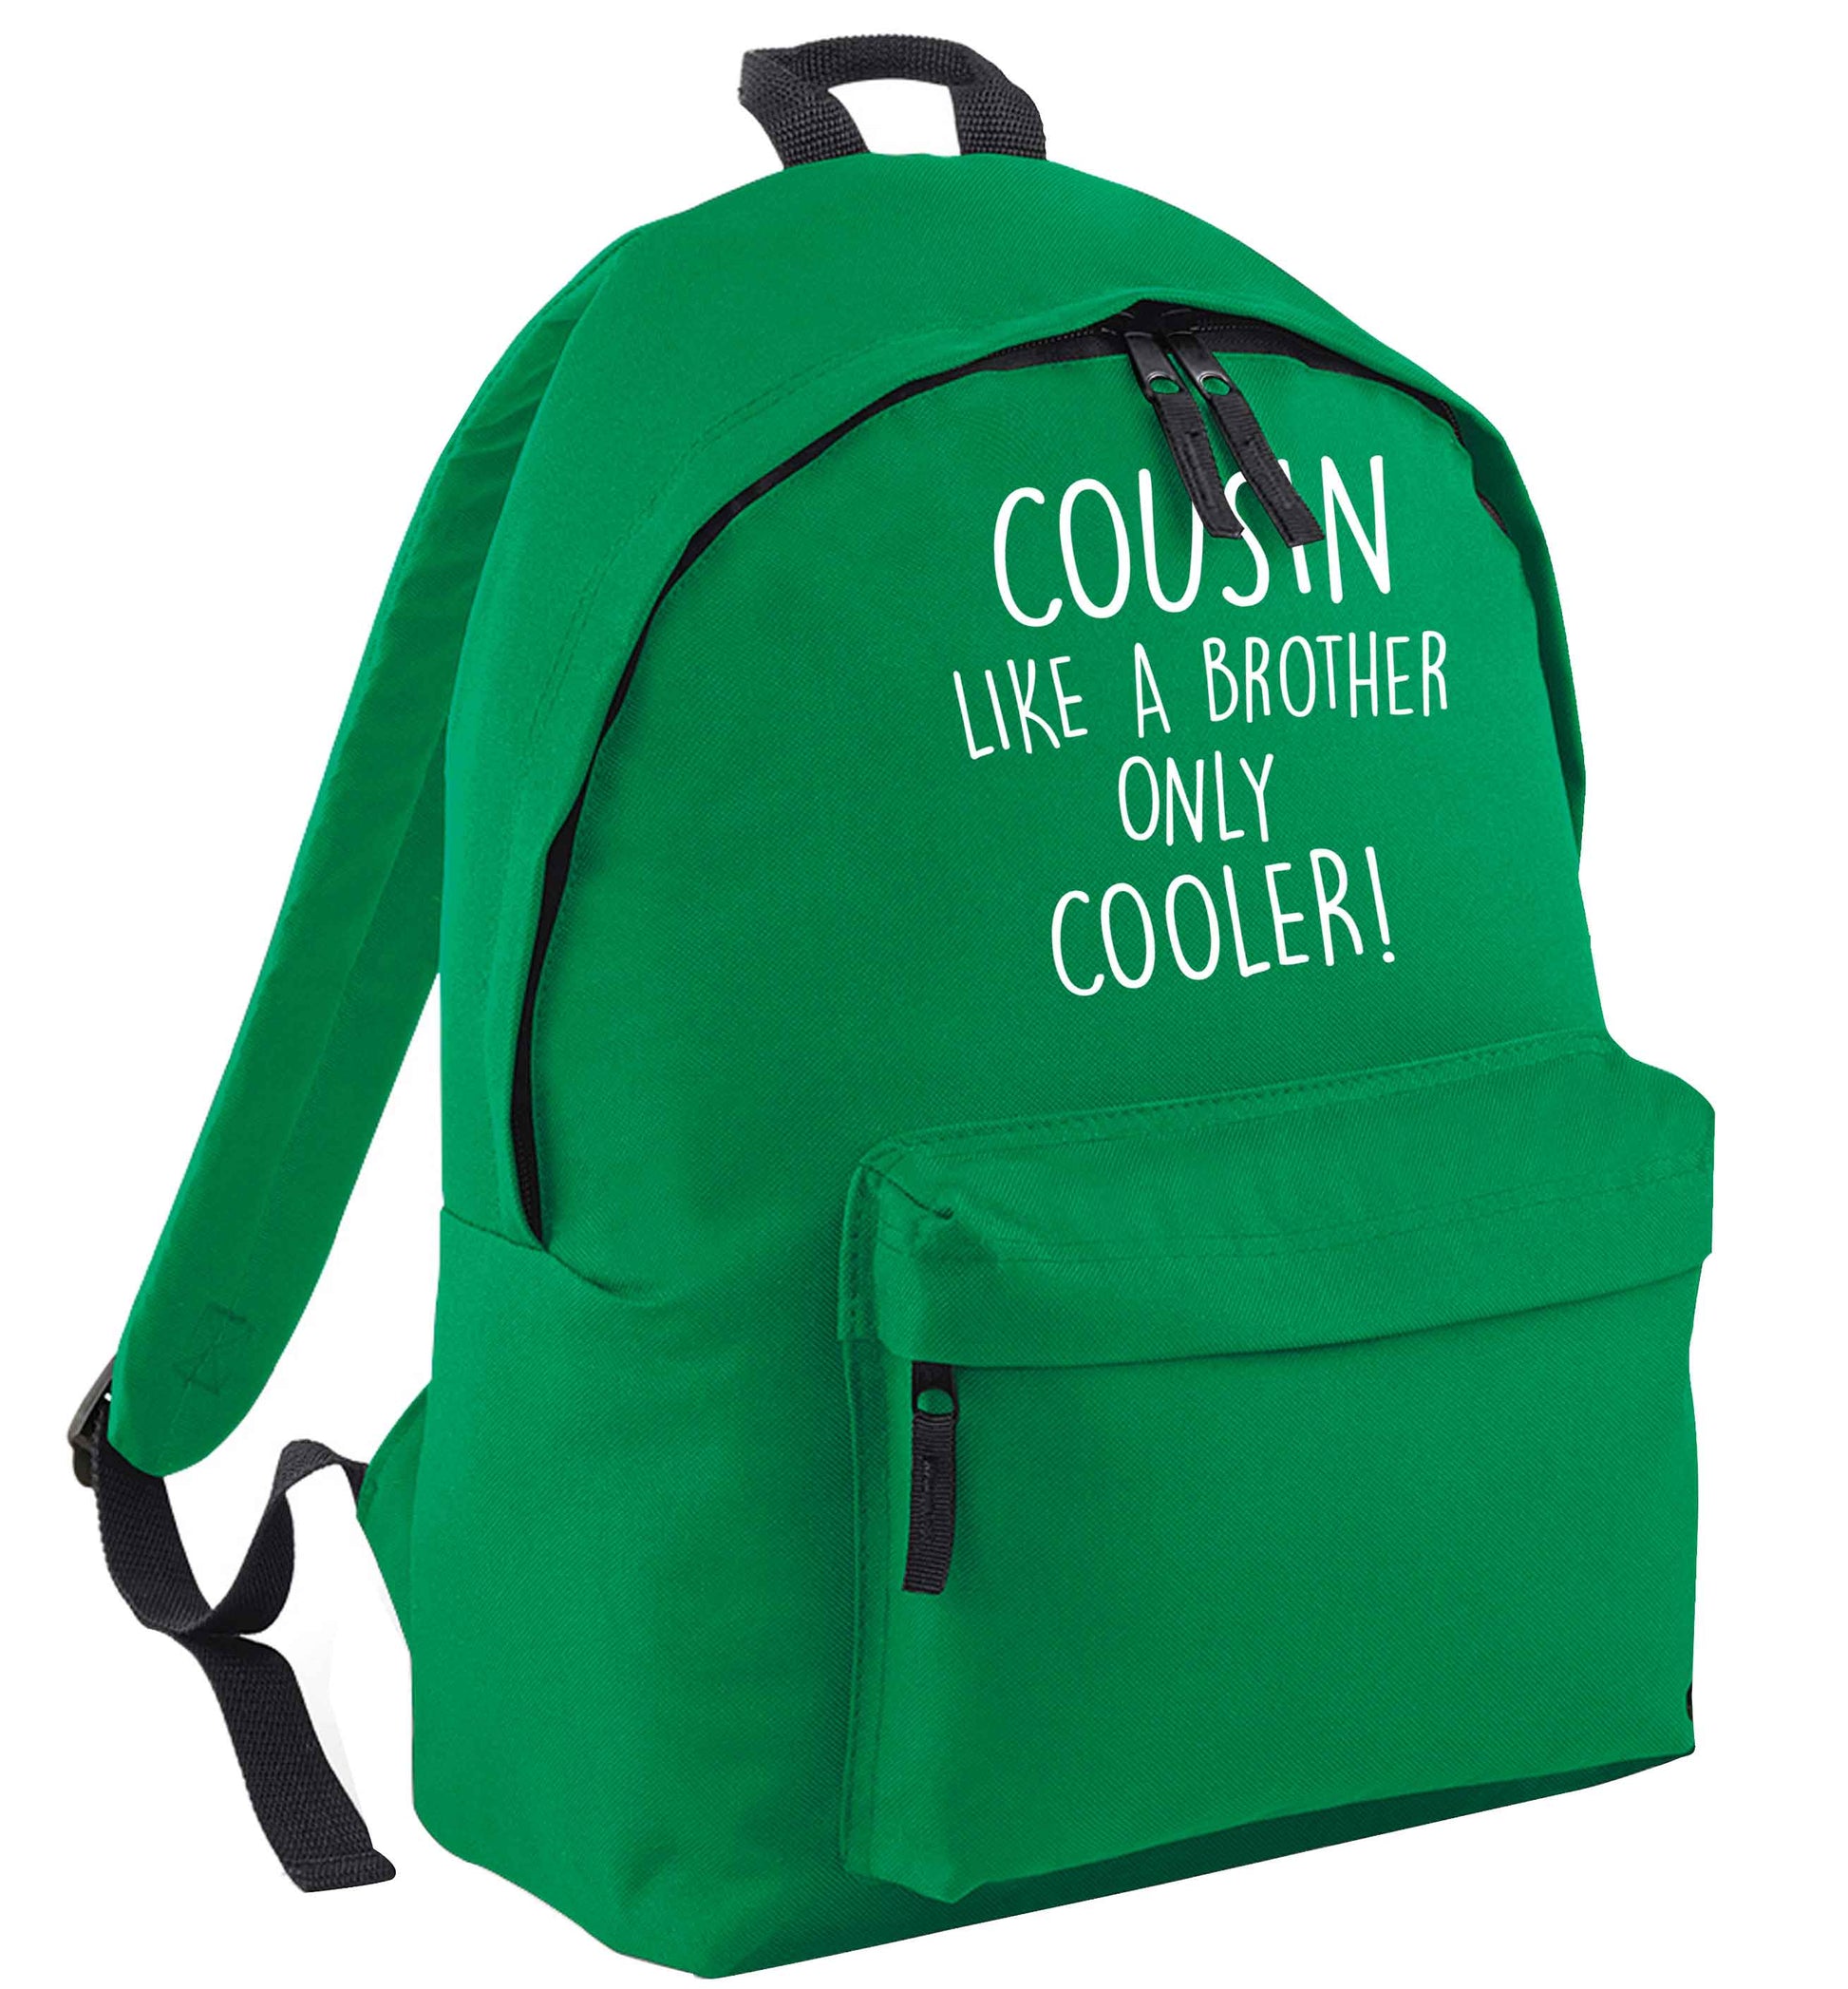 Cousin like a brother only cooler green adults backpack